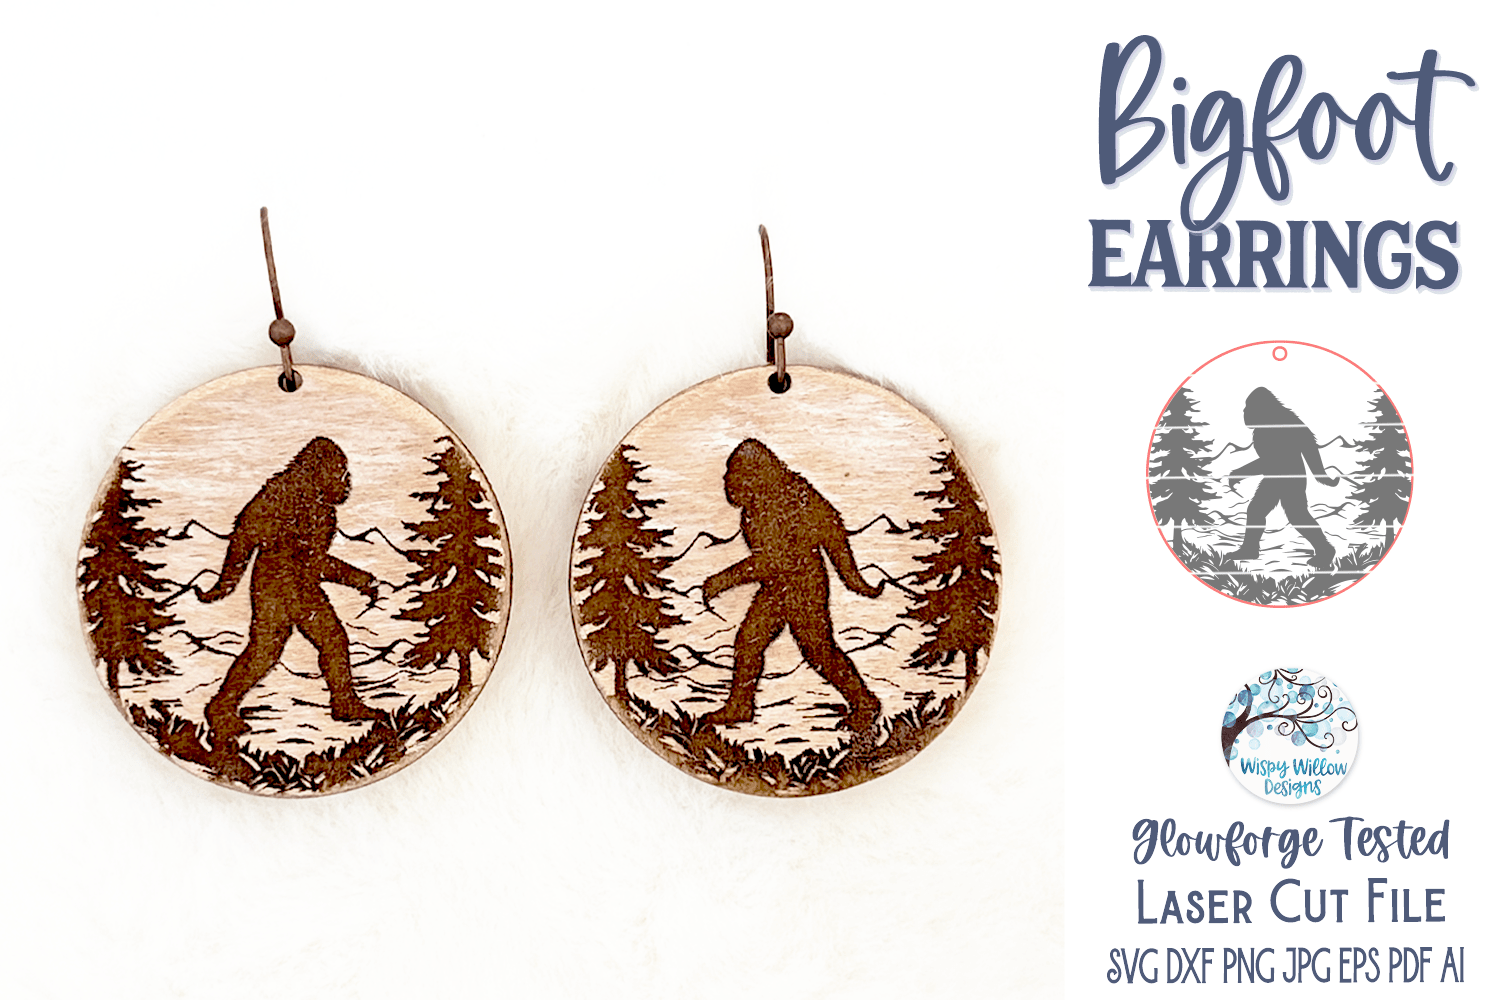 Bigfoot Earring File for Glowforge or Laser Cutter Wispy Willow Designs Company